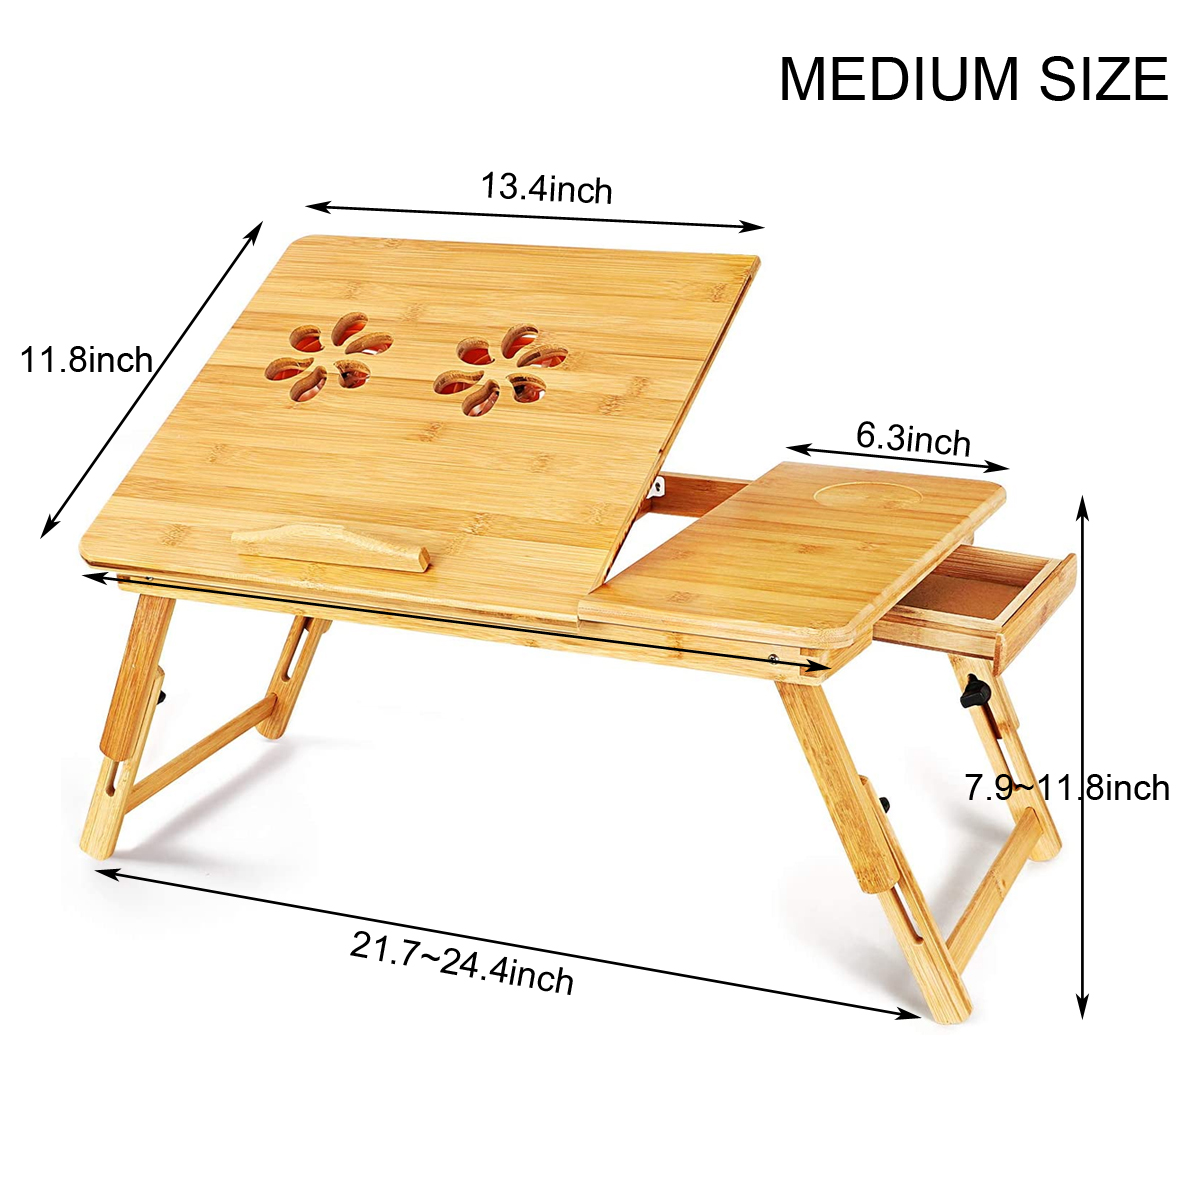 Bamboo-Laptop-Desk-Stand-Lap-Desk-Table-Flower-Pattern-Foldable-Breakfast-Serving-Bed-Tray-with-Stor-1798257-4